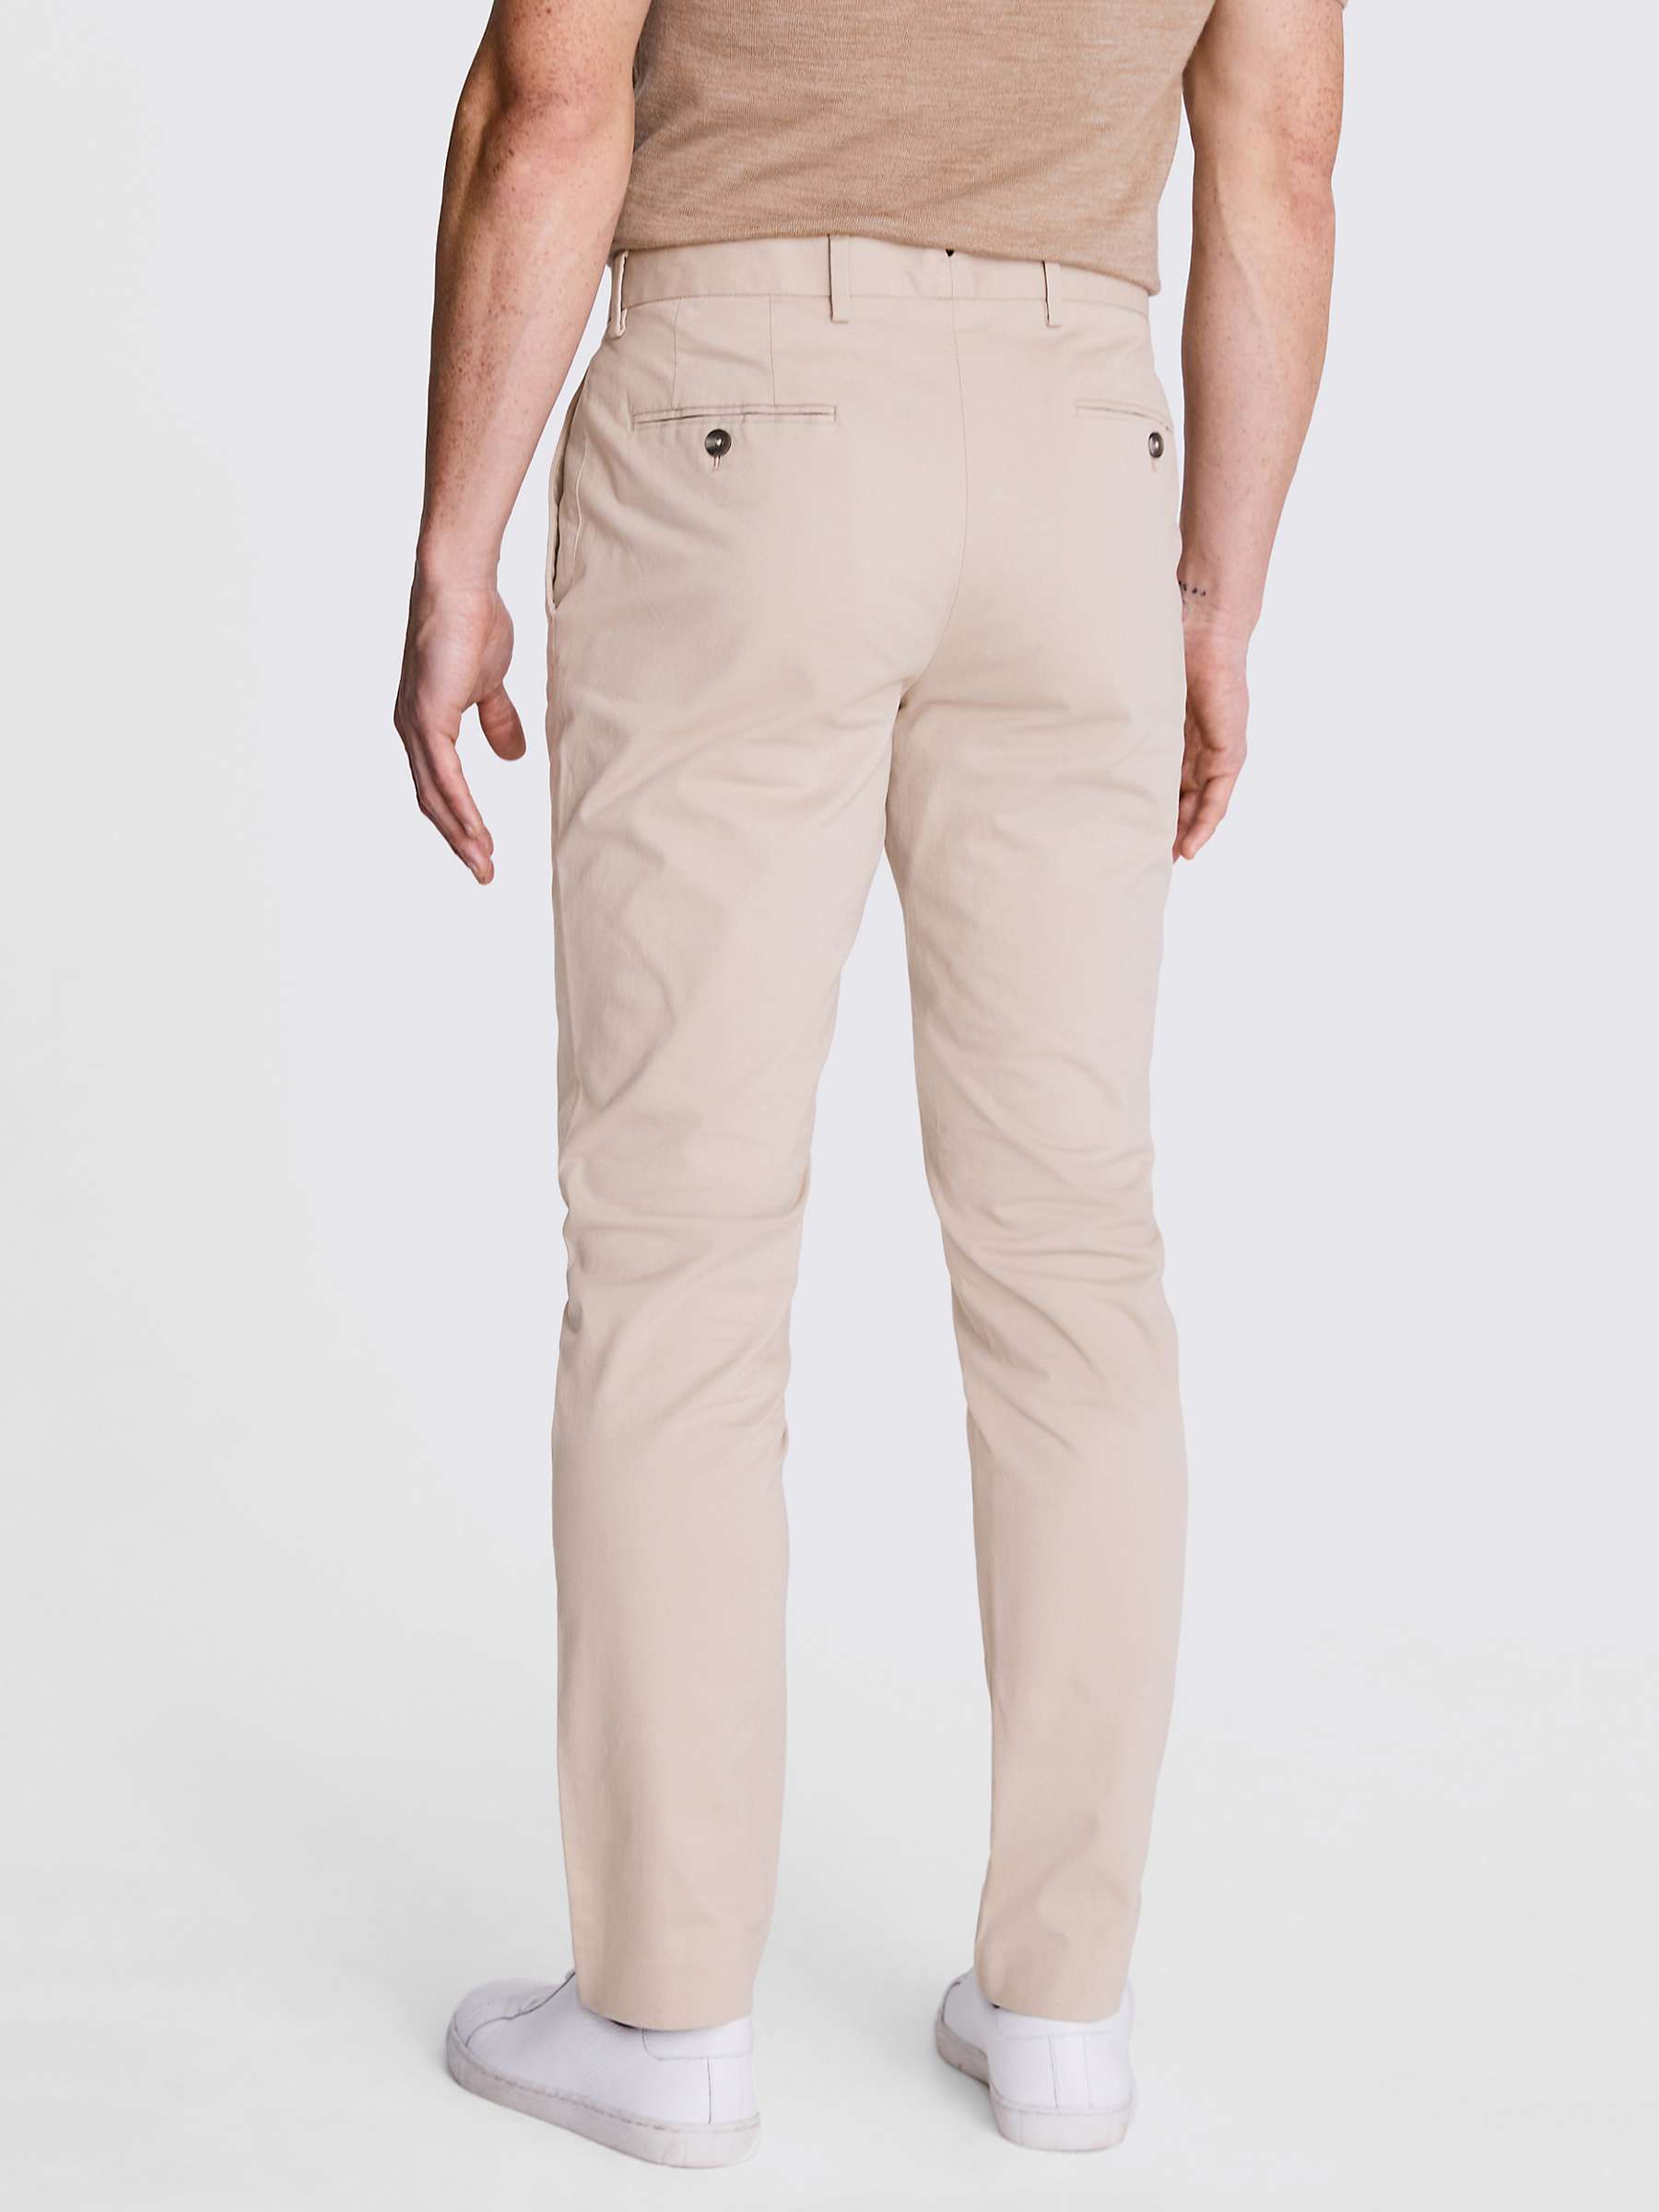 Moss Slim Fit Chinos, Beige at John Lewis & Partners